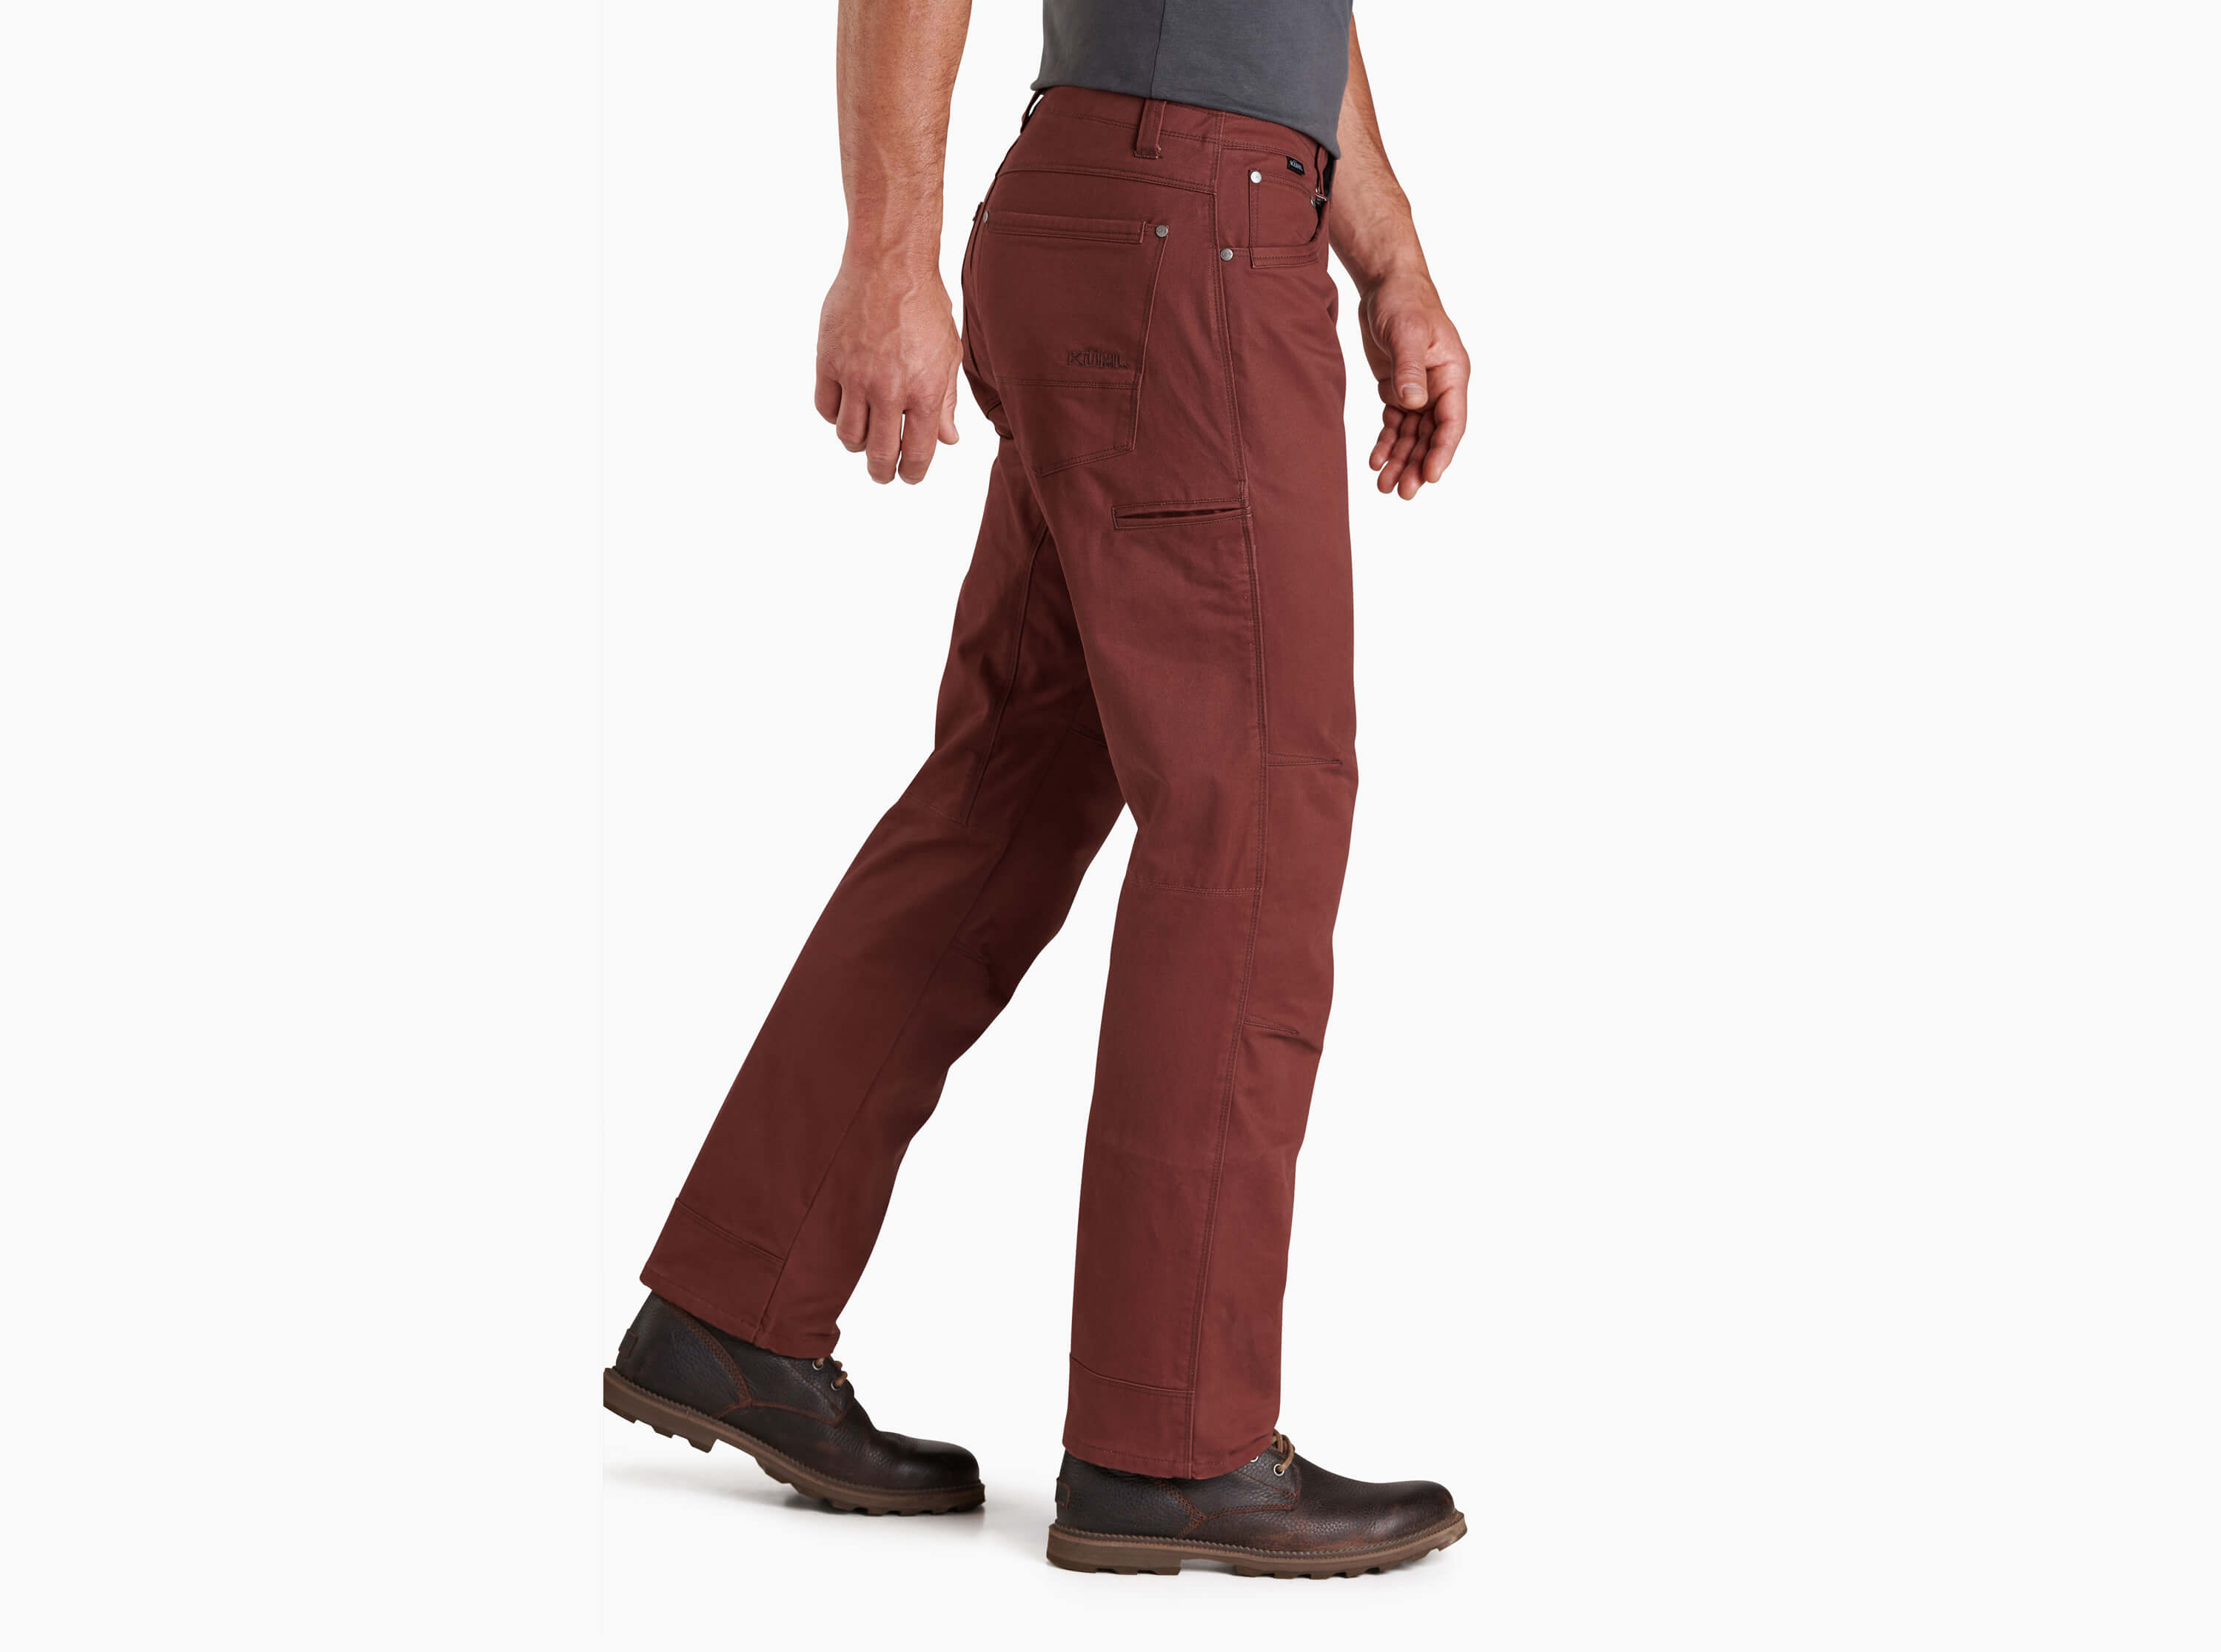 Kuhl Rydr Hiking Pant Mens 40x32 Brown Stretch Nylon Lightweight Active  Outdoor - Simpson Advanced Chiropractic & Medical Center